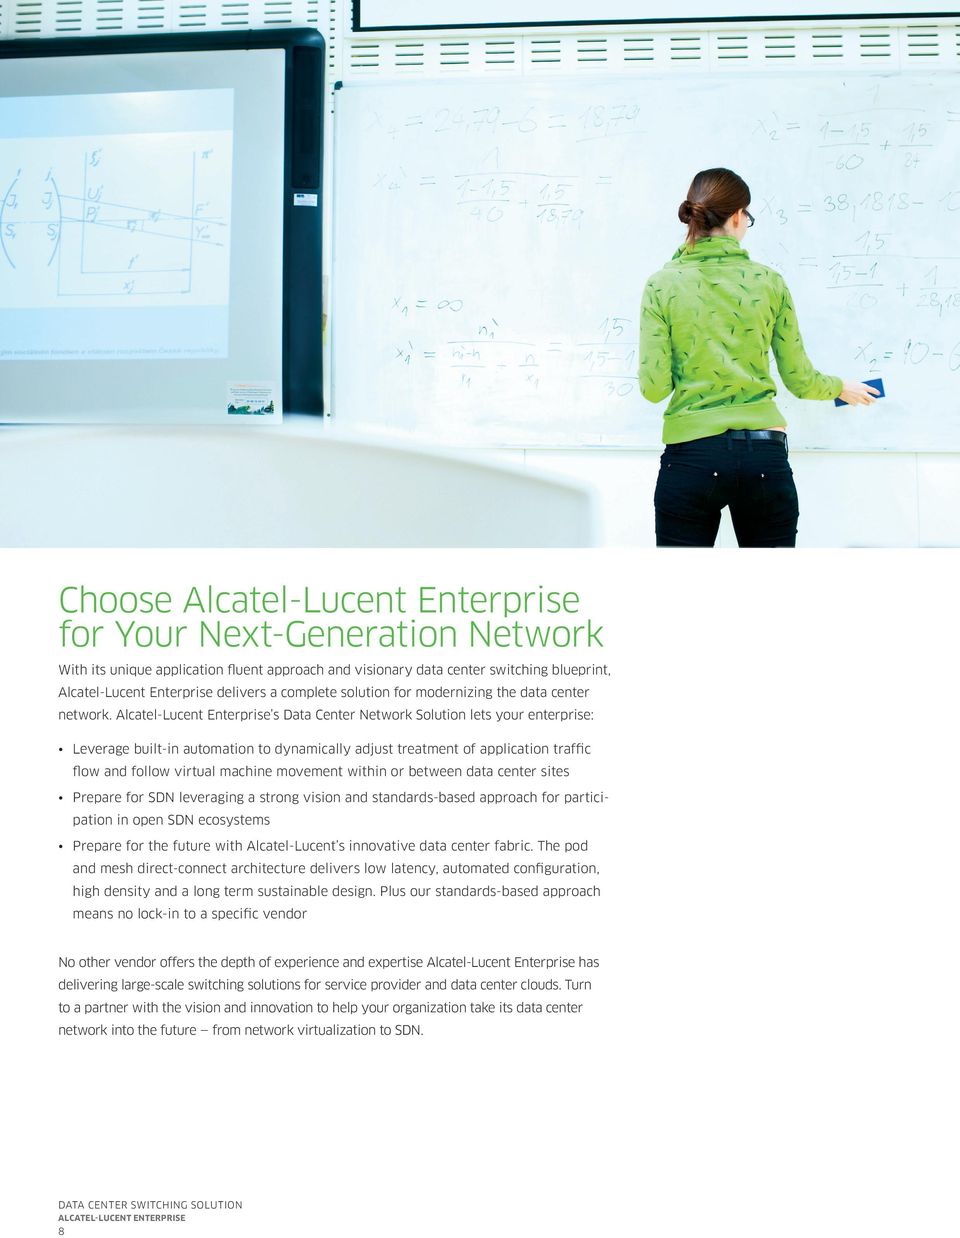 Alcatel-Lucent Enterprise s Data Center Network Solution lets your enterprise: Leverage built-in automation to dynamically adjust treatment of application traffic flow and follow virtual machine